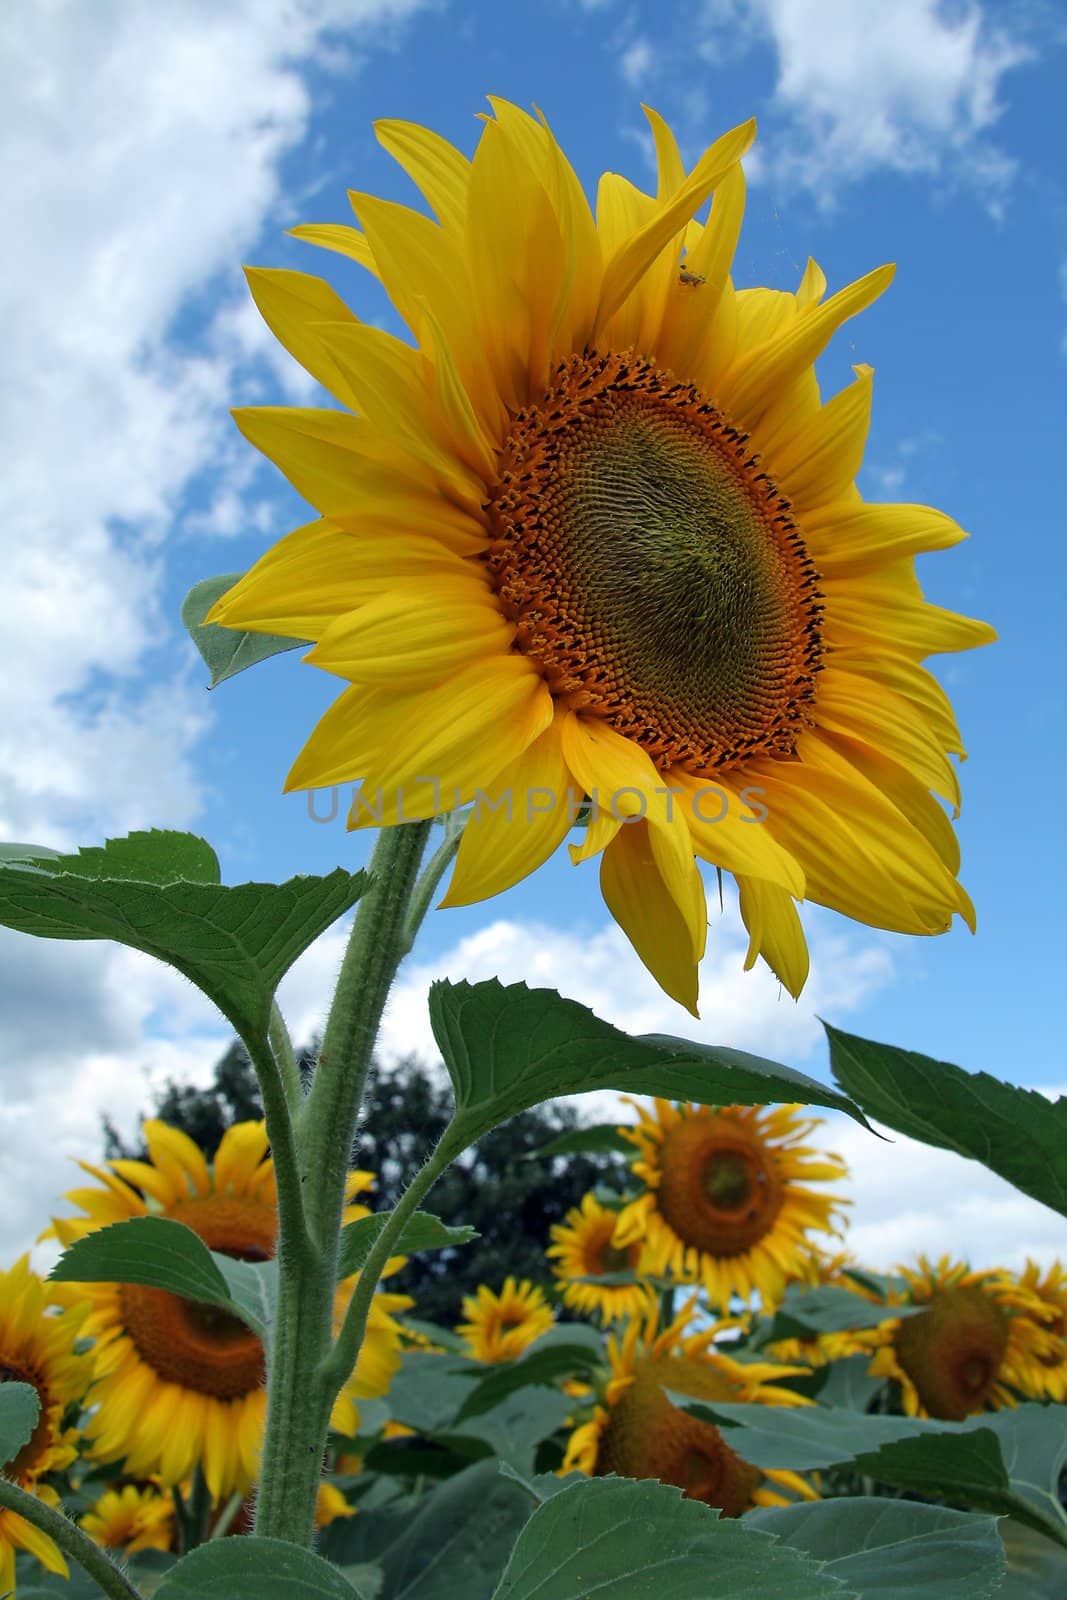 Big sunflower in the middle of sunflowers field